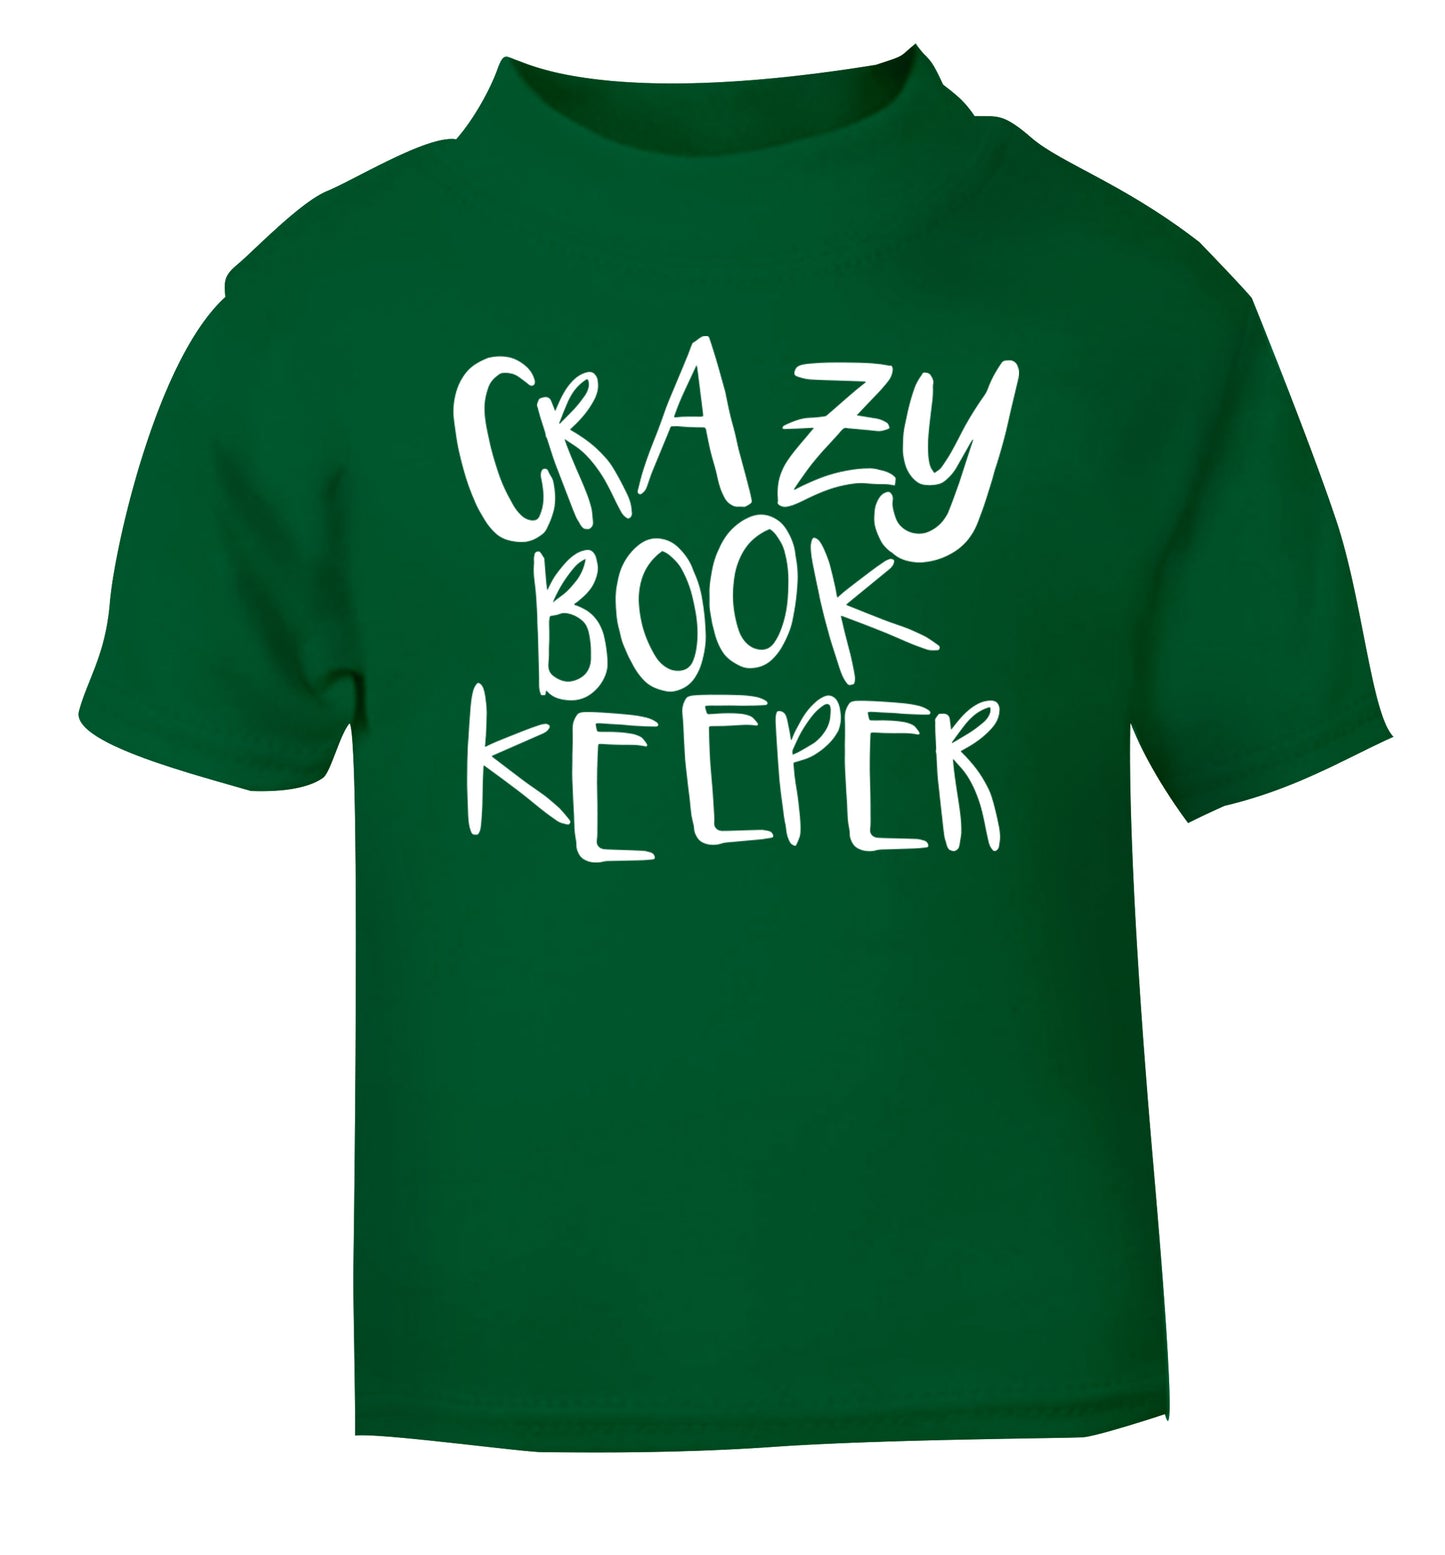 Crazy bookkeeper green Baby Toddler Tshirt 2 Years